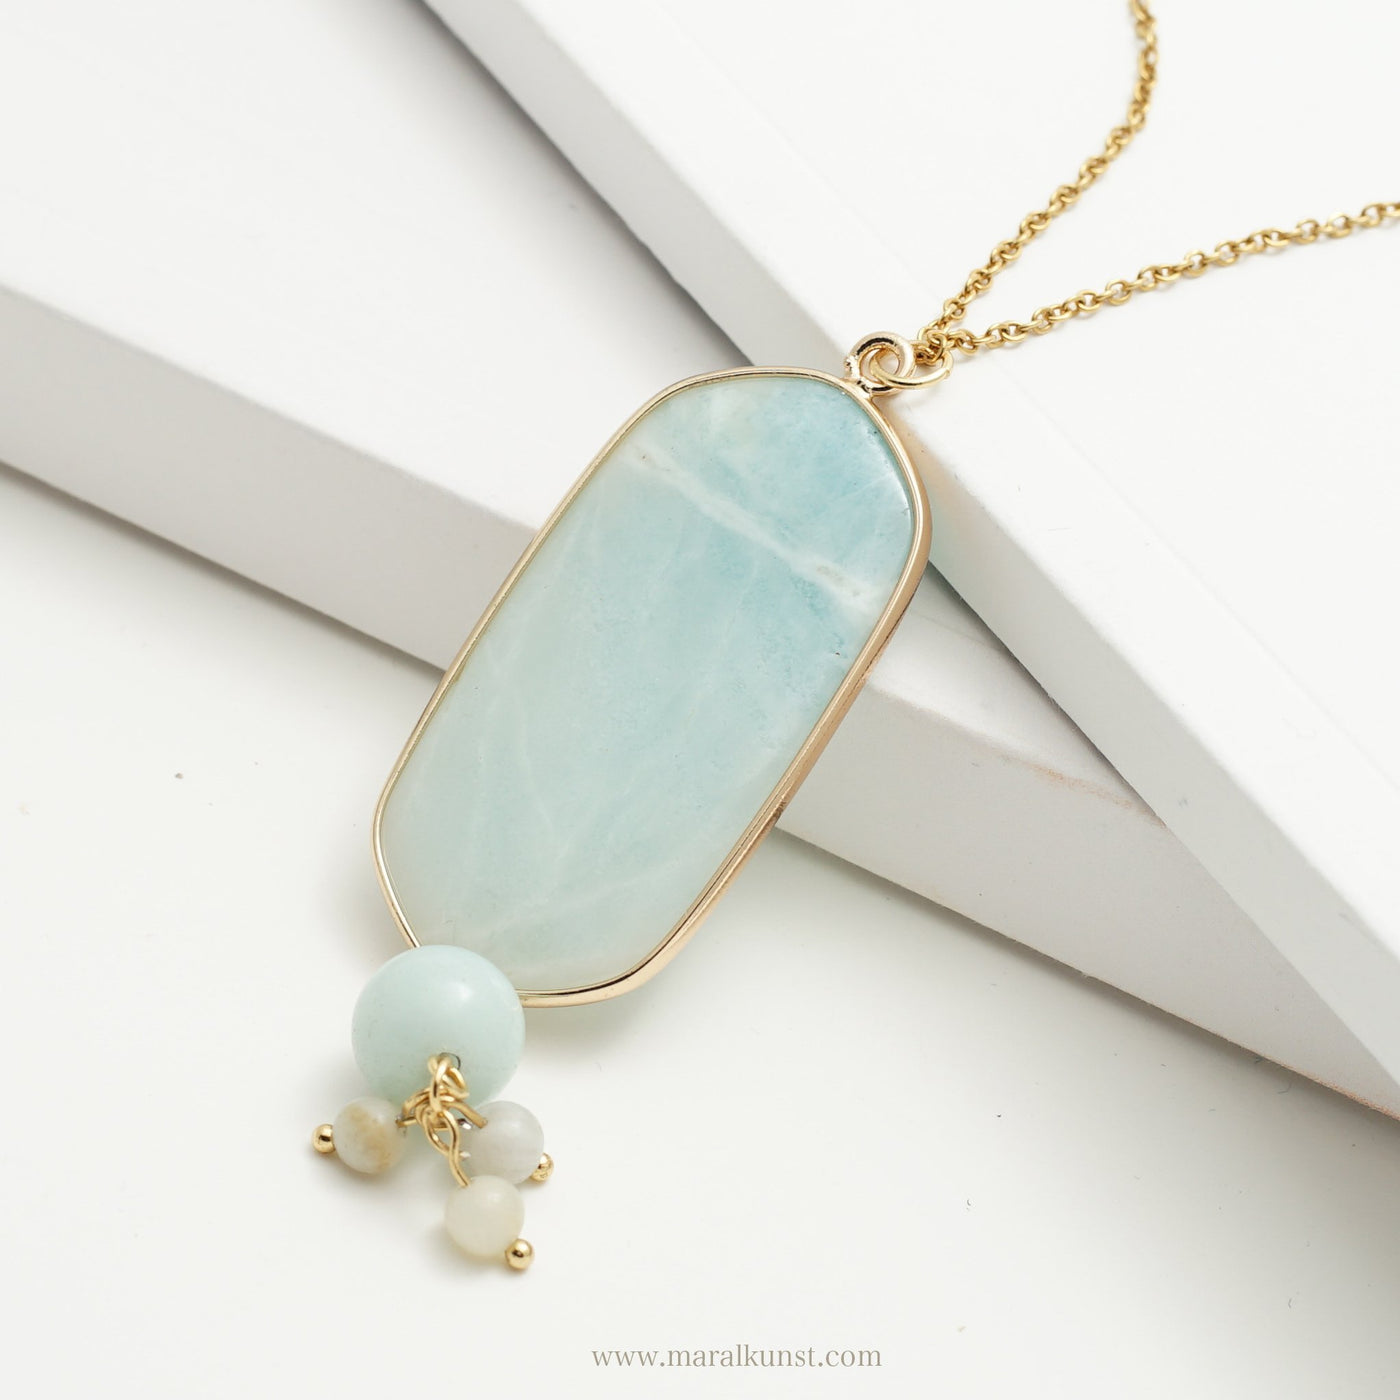 Blue Stone necklace - Maral Kunst Jewelry